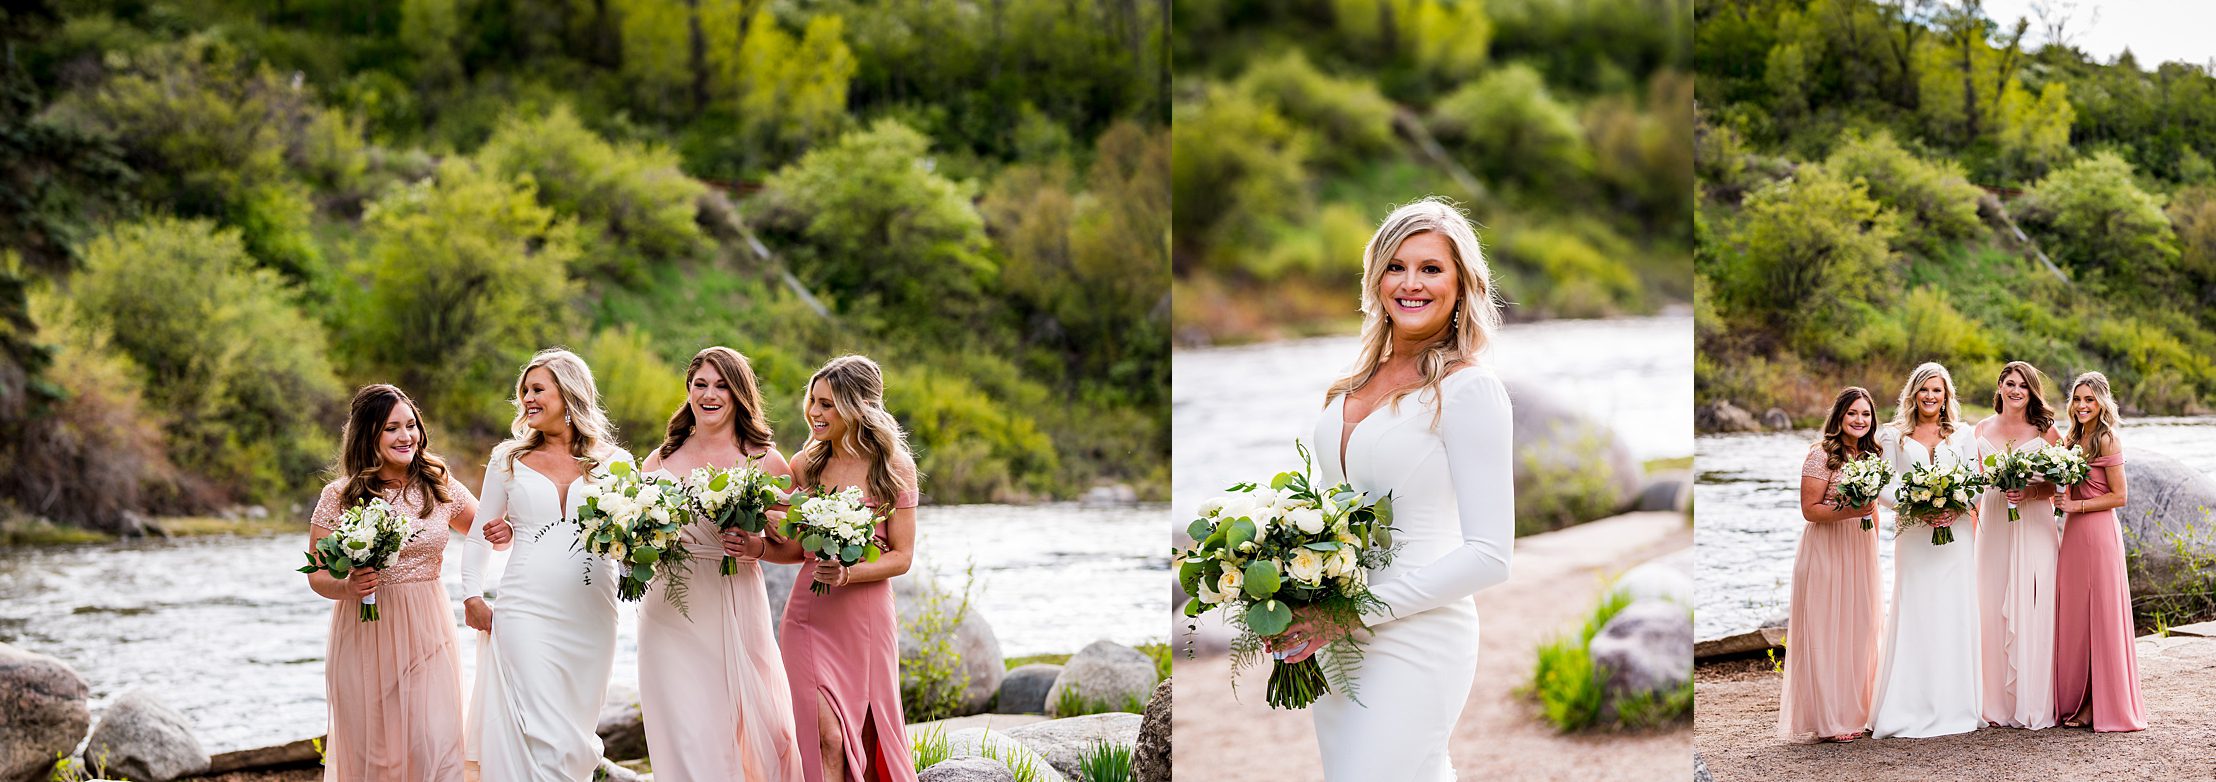 bridesmaids photos with the vail water behind them